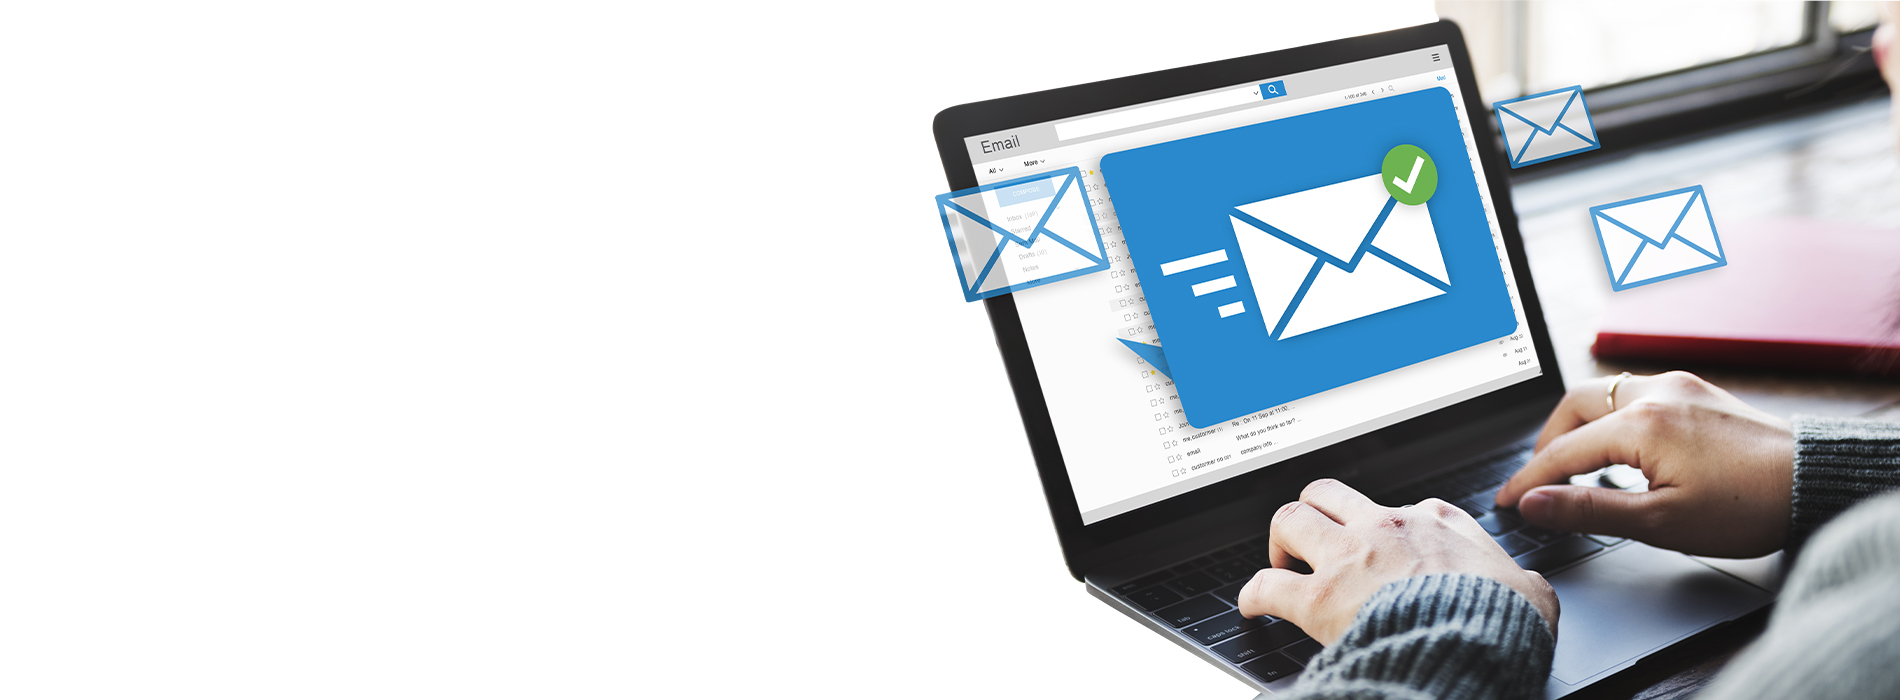 A person using a laptop with an email open, displaying an envelope icon and the text  email .